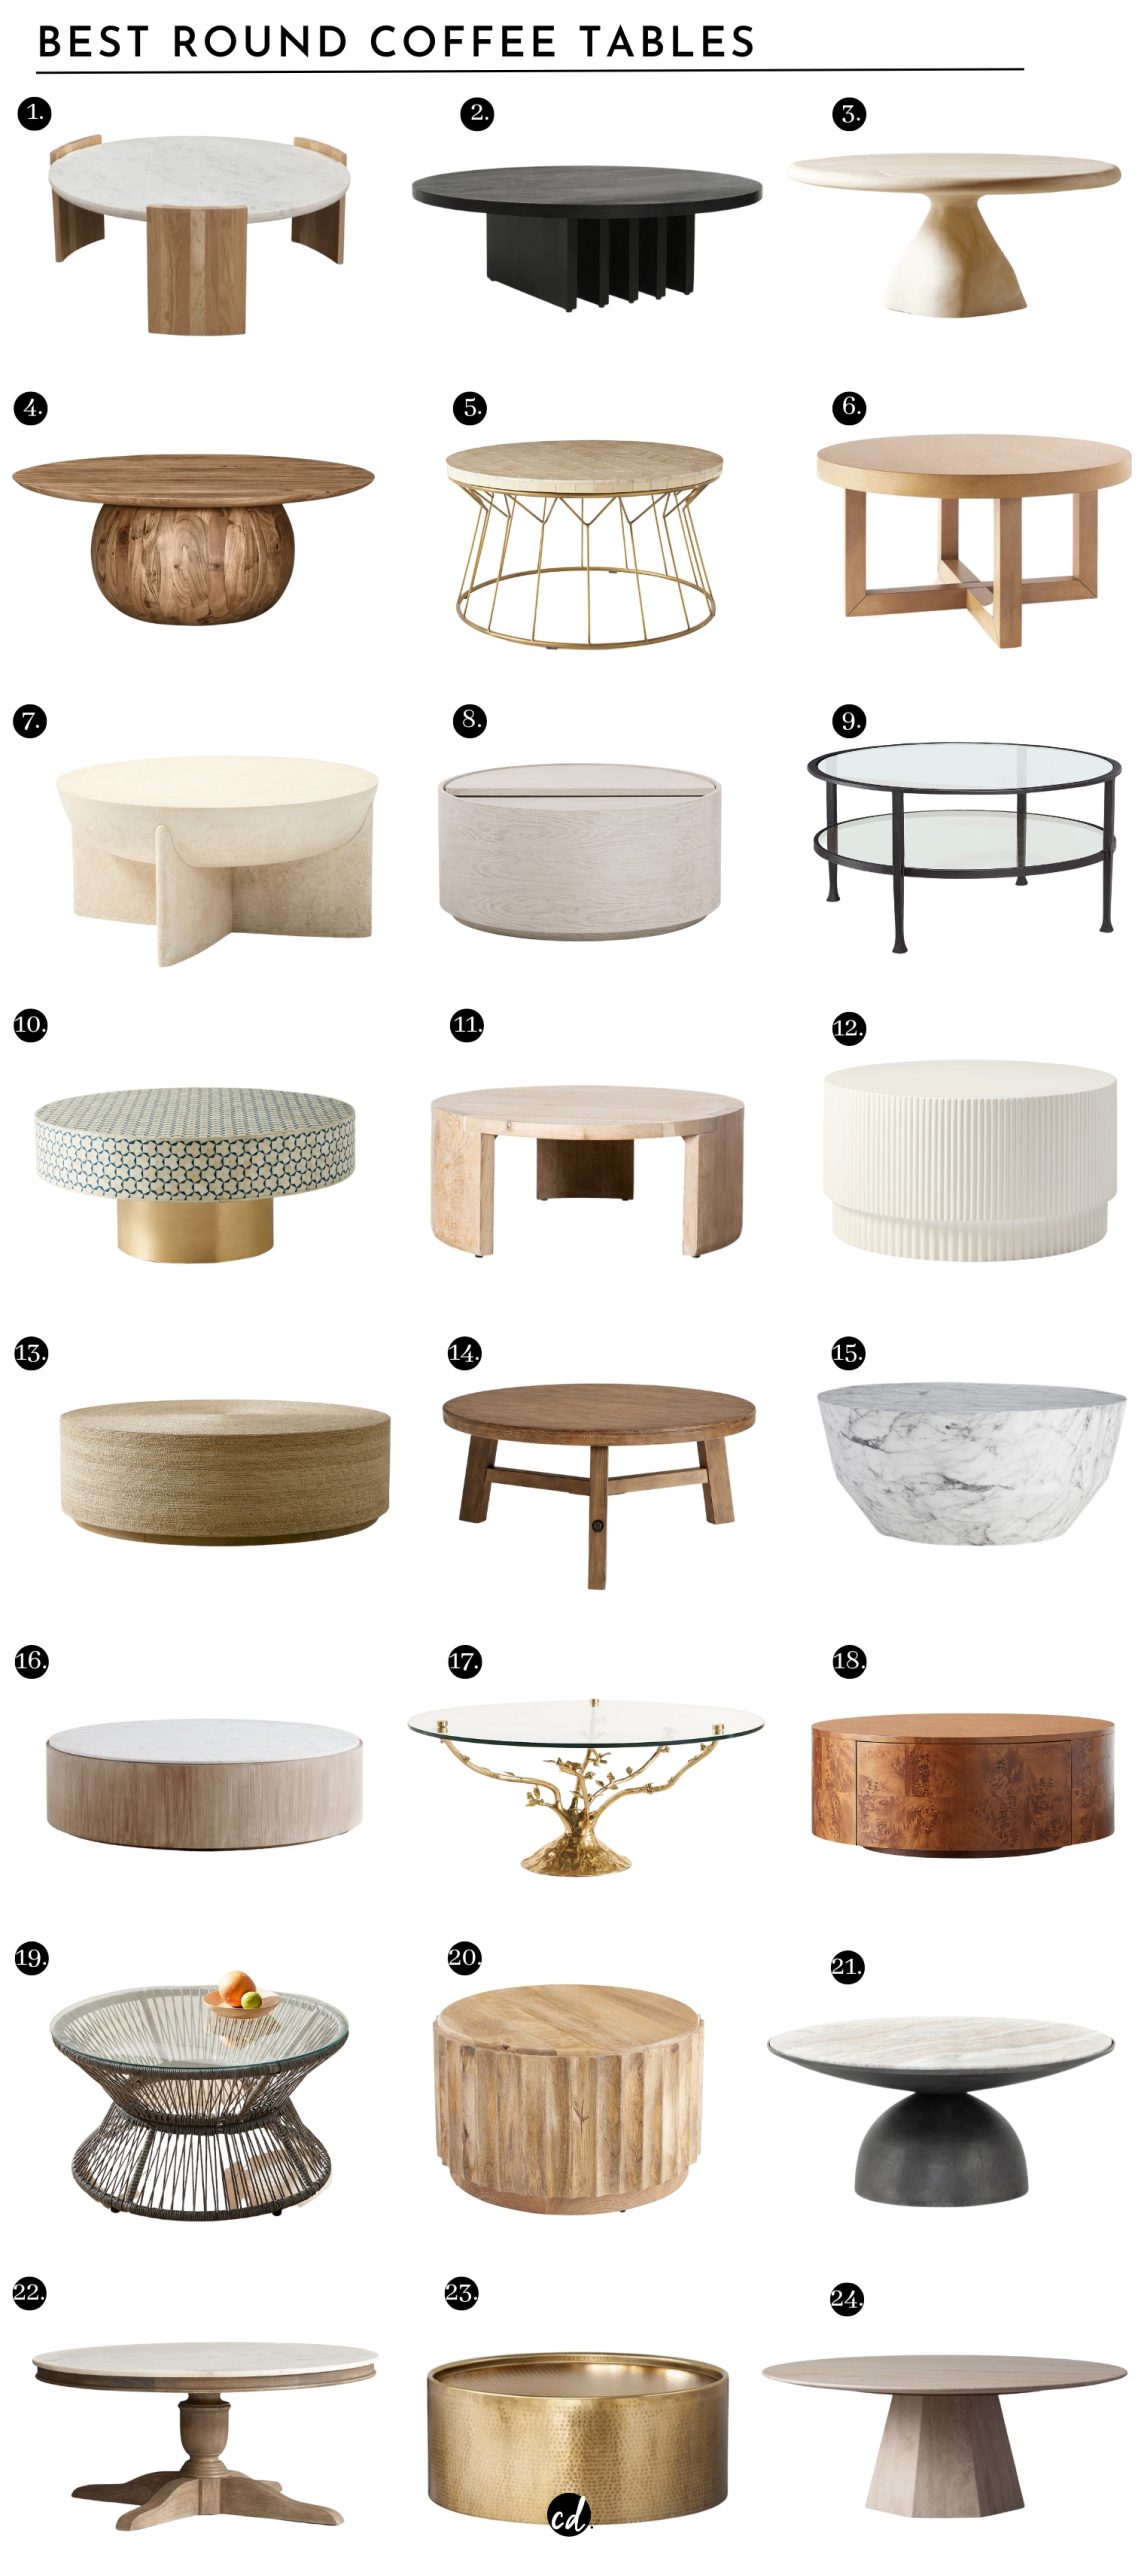 Best Round Coffee Tables:
1. Whilem Round Coffee Table | 2. Pentwater Round Coffee Table | 3. Espira Round Cream Marbled Resin Coffee Table | 4. Jace Round Coffee Table | 5. Hourglass Indoor/Outdoor Coffee Table | 6. Rose Park Round Wood Coffee Table | 7. Monti Lava Stone Coffee Table | 8. Volume Round Storage Drum Coffee Table | 9. Tanner Round Glass Coffee Table | 10. Targua Inlay Coffee Table | 11. Kerstan Coffee Table | 12. Fluted Coffee Table | 13. Point Reyes Round Coffee Table | 14. Rustic Farmhouse Round Coffee Table | 15. Martel Coffee Table | 16. Troupe Round Pine Coffee Table | 17. Tree Dwelling Coffee Table | 18. Burl Rotating Coffee Table | 19. Salento Coffee Table | 20. Ishan Round Driftwood Ridged Coffee Table | 21. Bellaire Coffee Table | 22. Alexandra Round Marble Coffee Table | 23. Manila Round Hammered Drum Coffee Table | 24. Modena Round Coffee Table @chloedominik